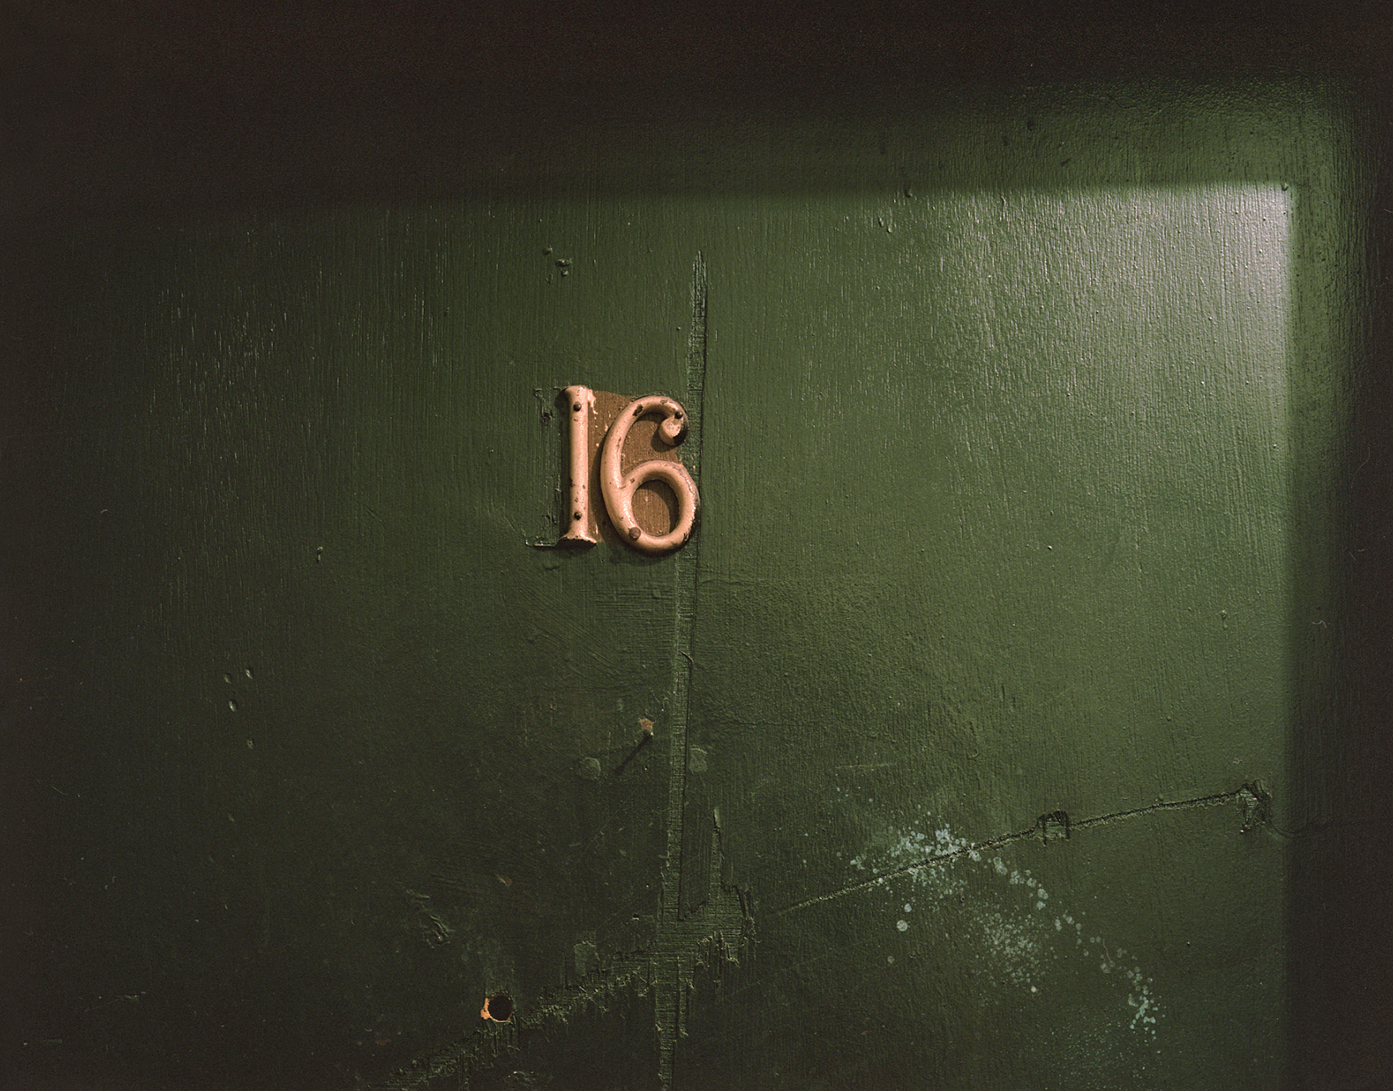 Lise Sarfati — the green door, the peephole and the number